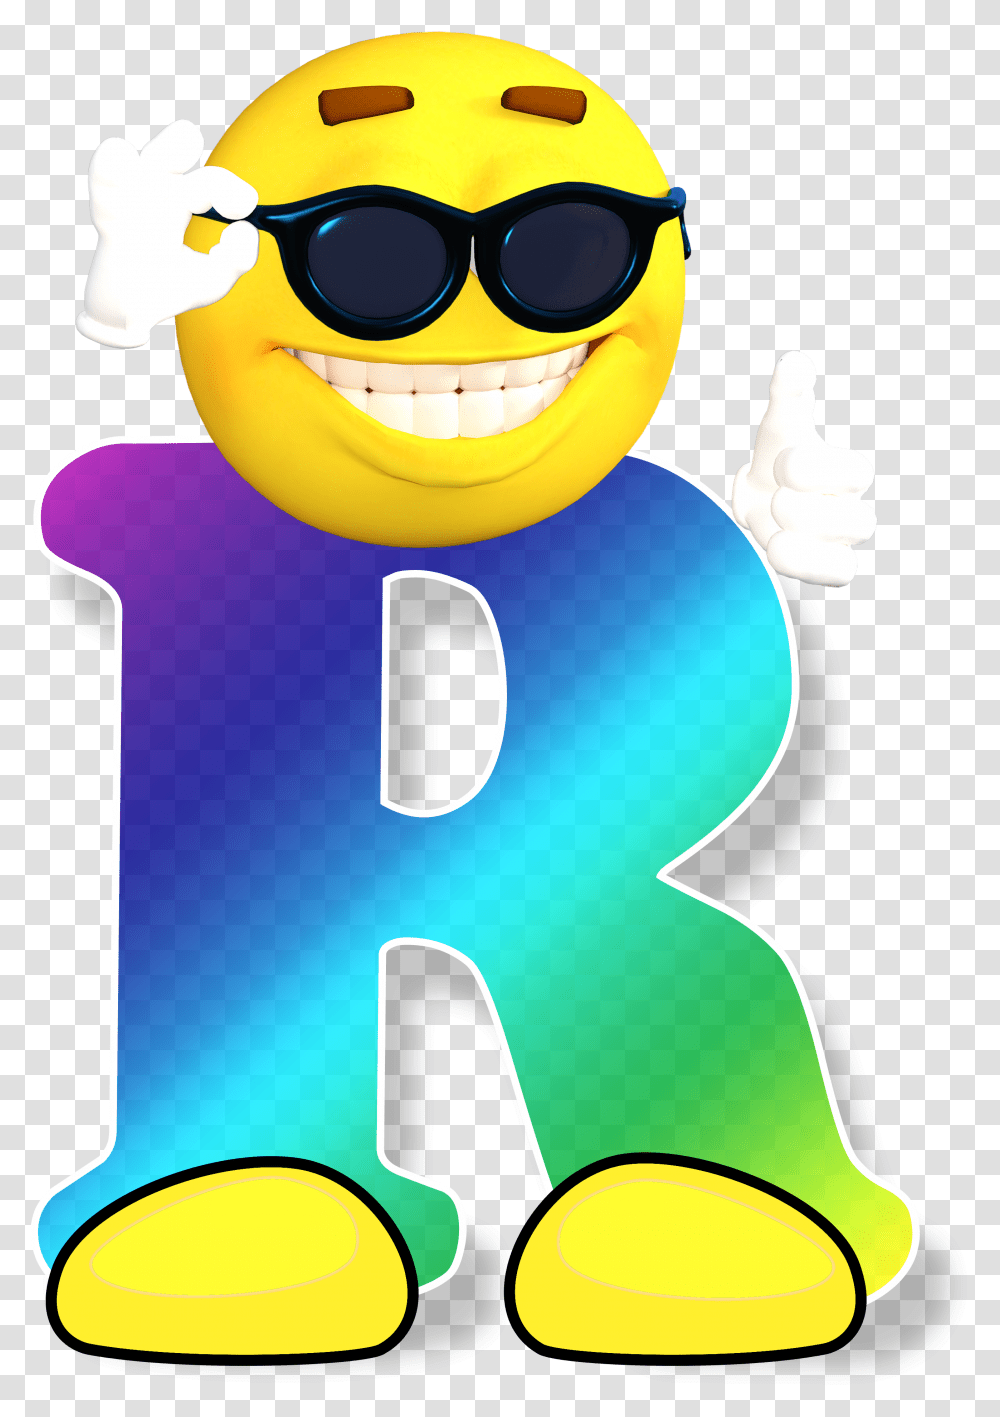 Letter R With Emoticon Face Abc Emoji Alphabet, Sunglasses, Accessories, Accessory, Text Transparent Png